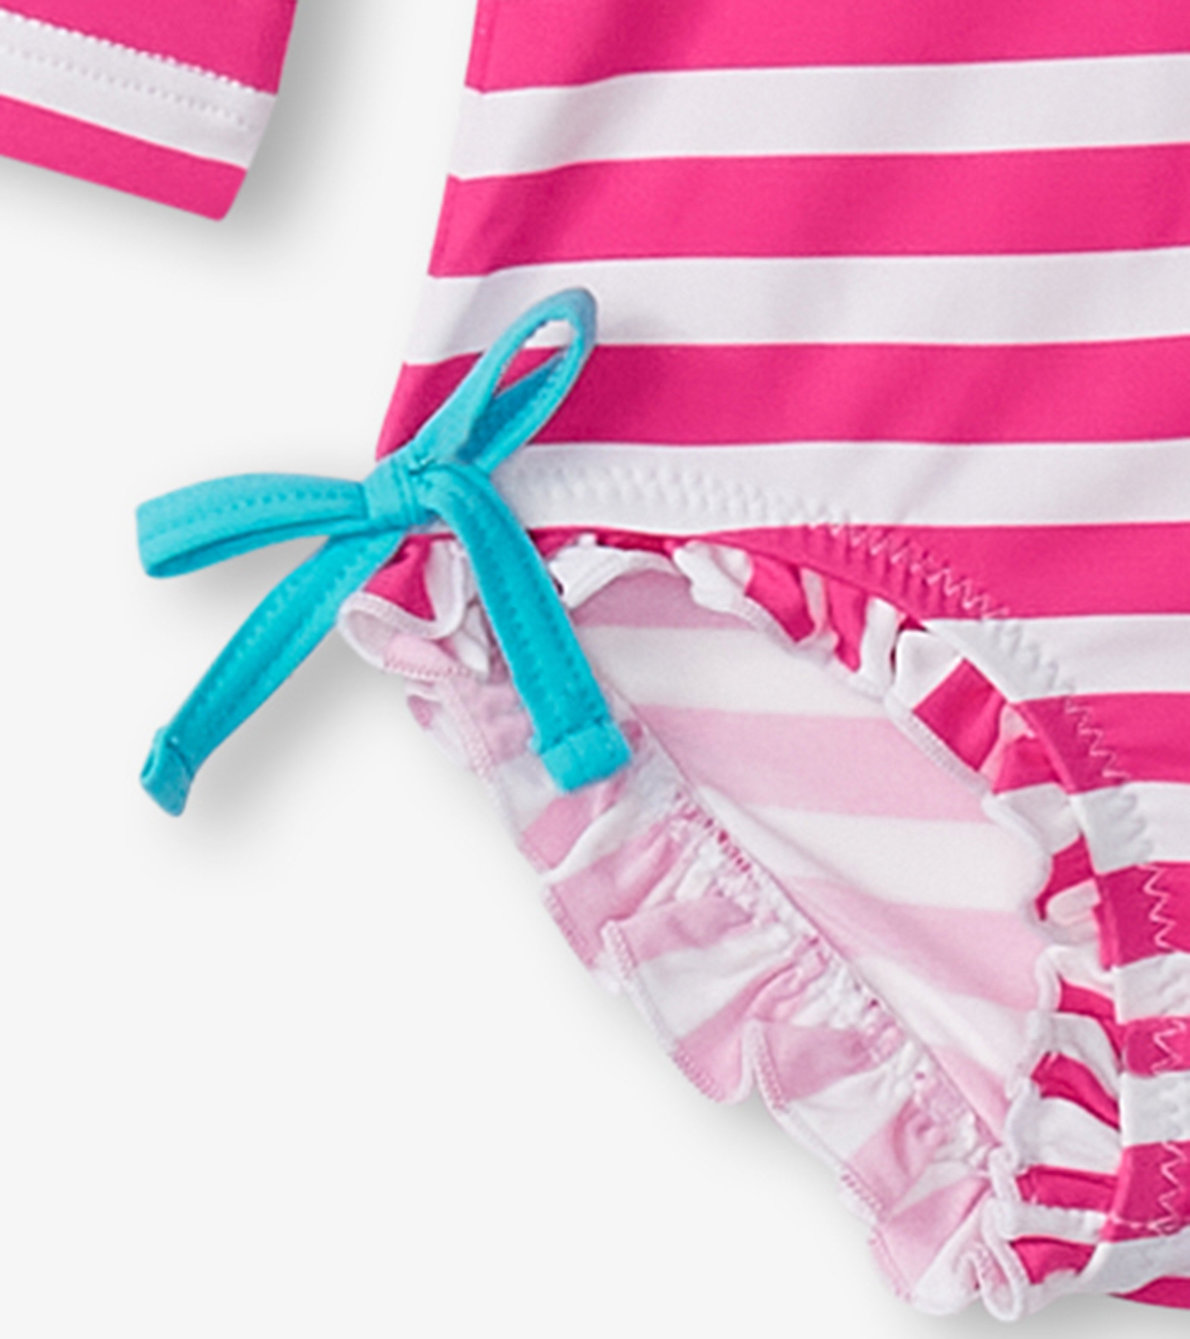 View larger image of Baby Girls Candy Stripes Rashguard Swimsuit